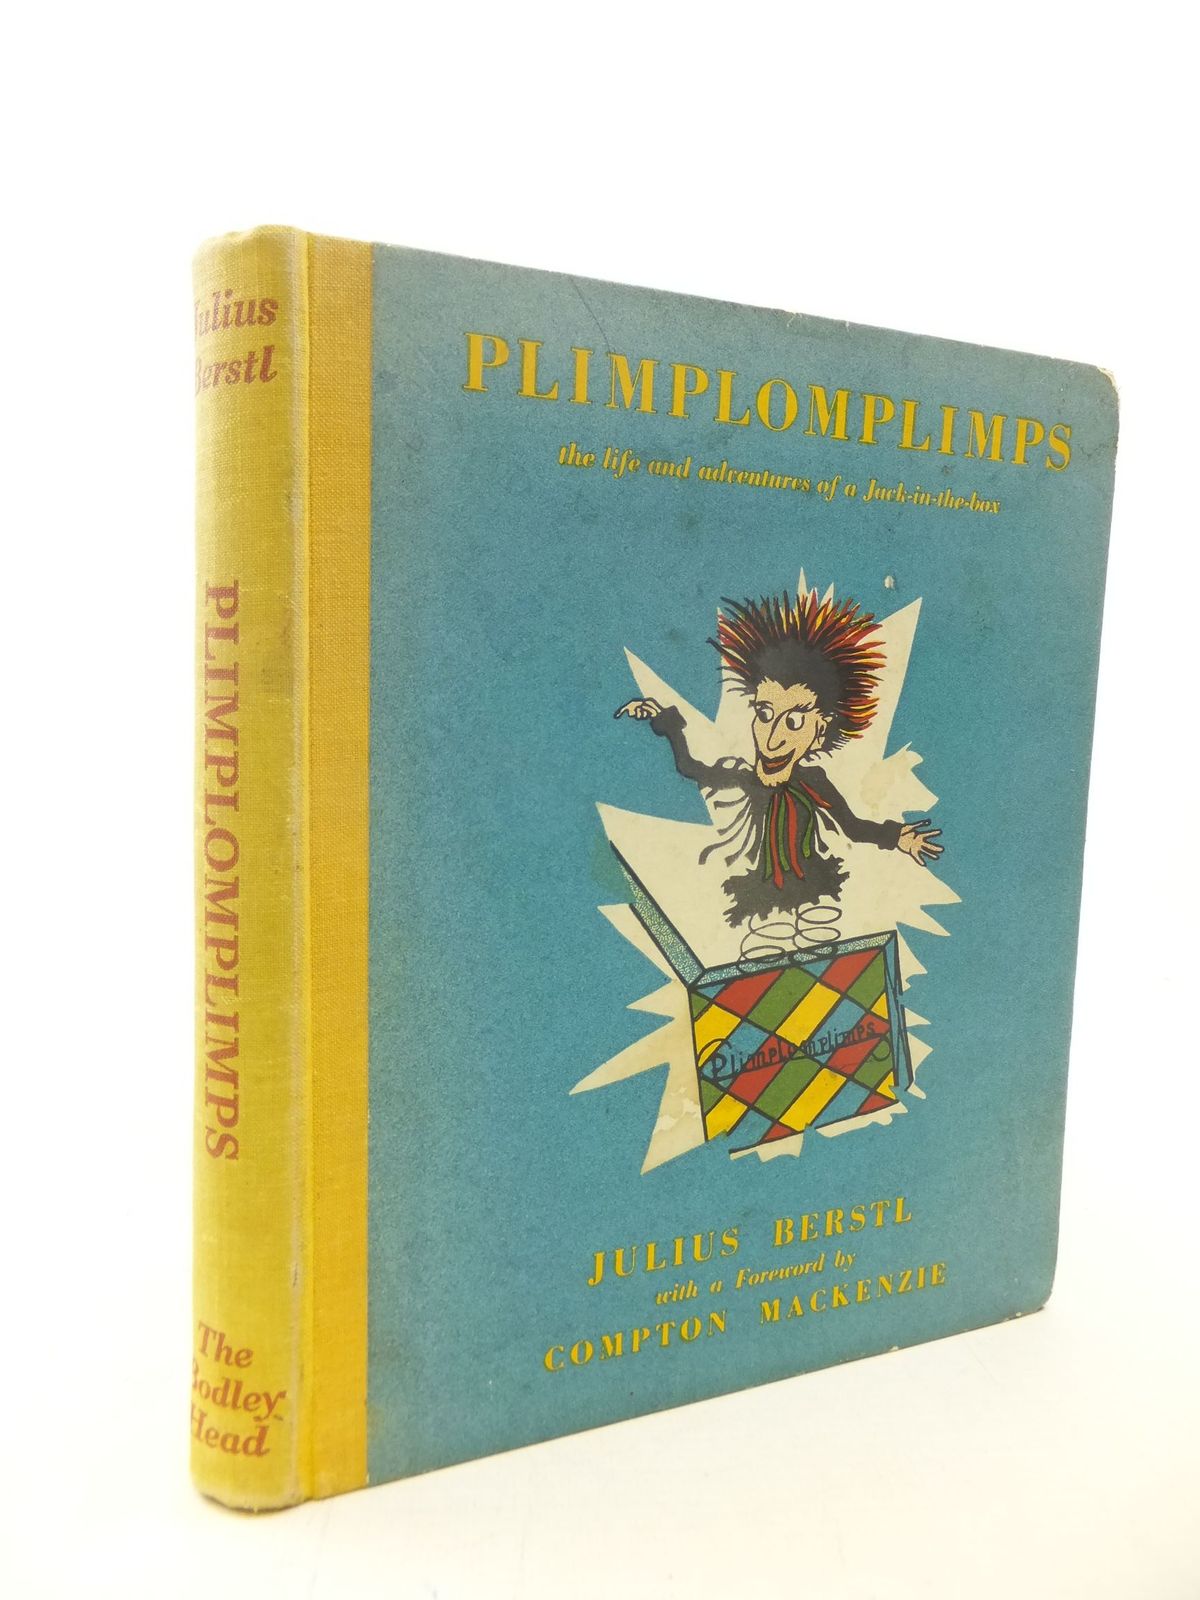 Photo of PLIMPLOMPLIMPS THE LIFE AND ADVENTURES OF JACK-IN-THE-BOX written by Berstl, Julius Mackenzie, Compton illustrated by Hofheinz, Wilgart published by The Bodley Head (STOCK CODE: 1711471)  for sale by Stella & Rose's Books